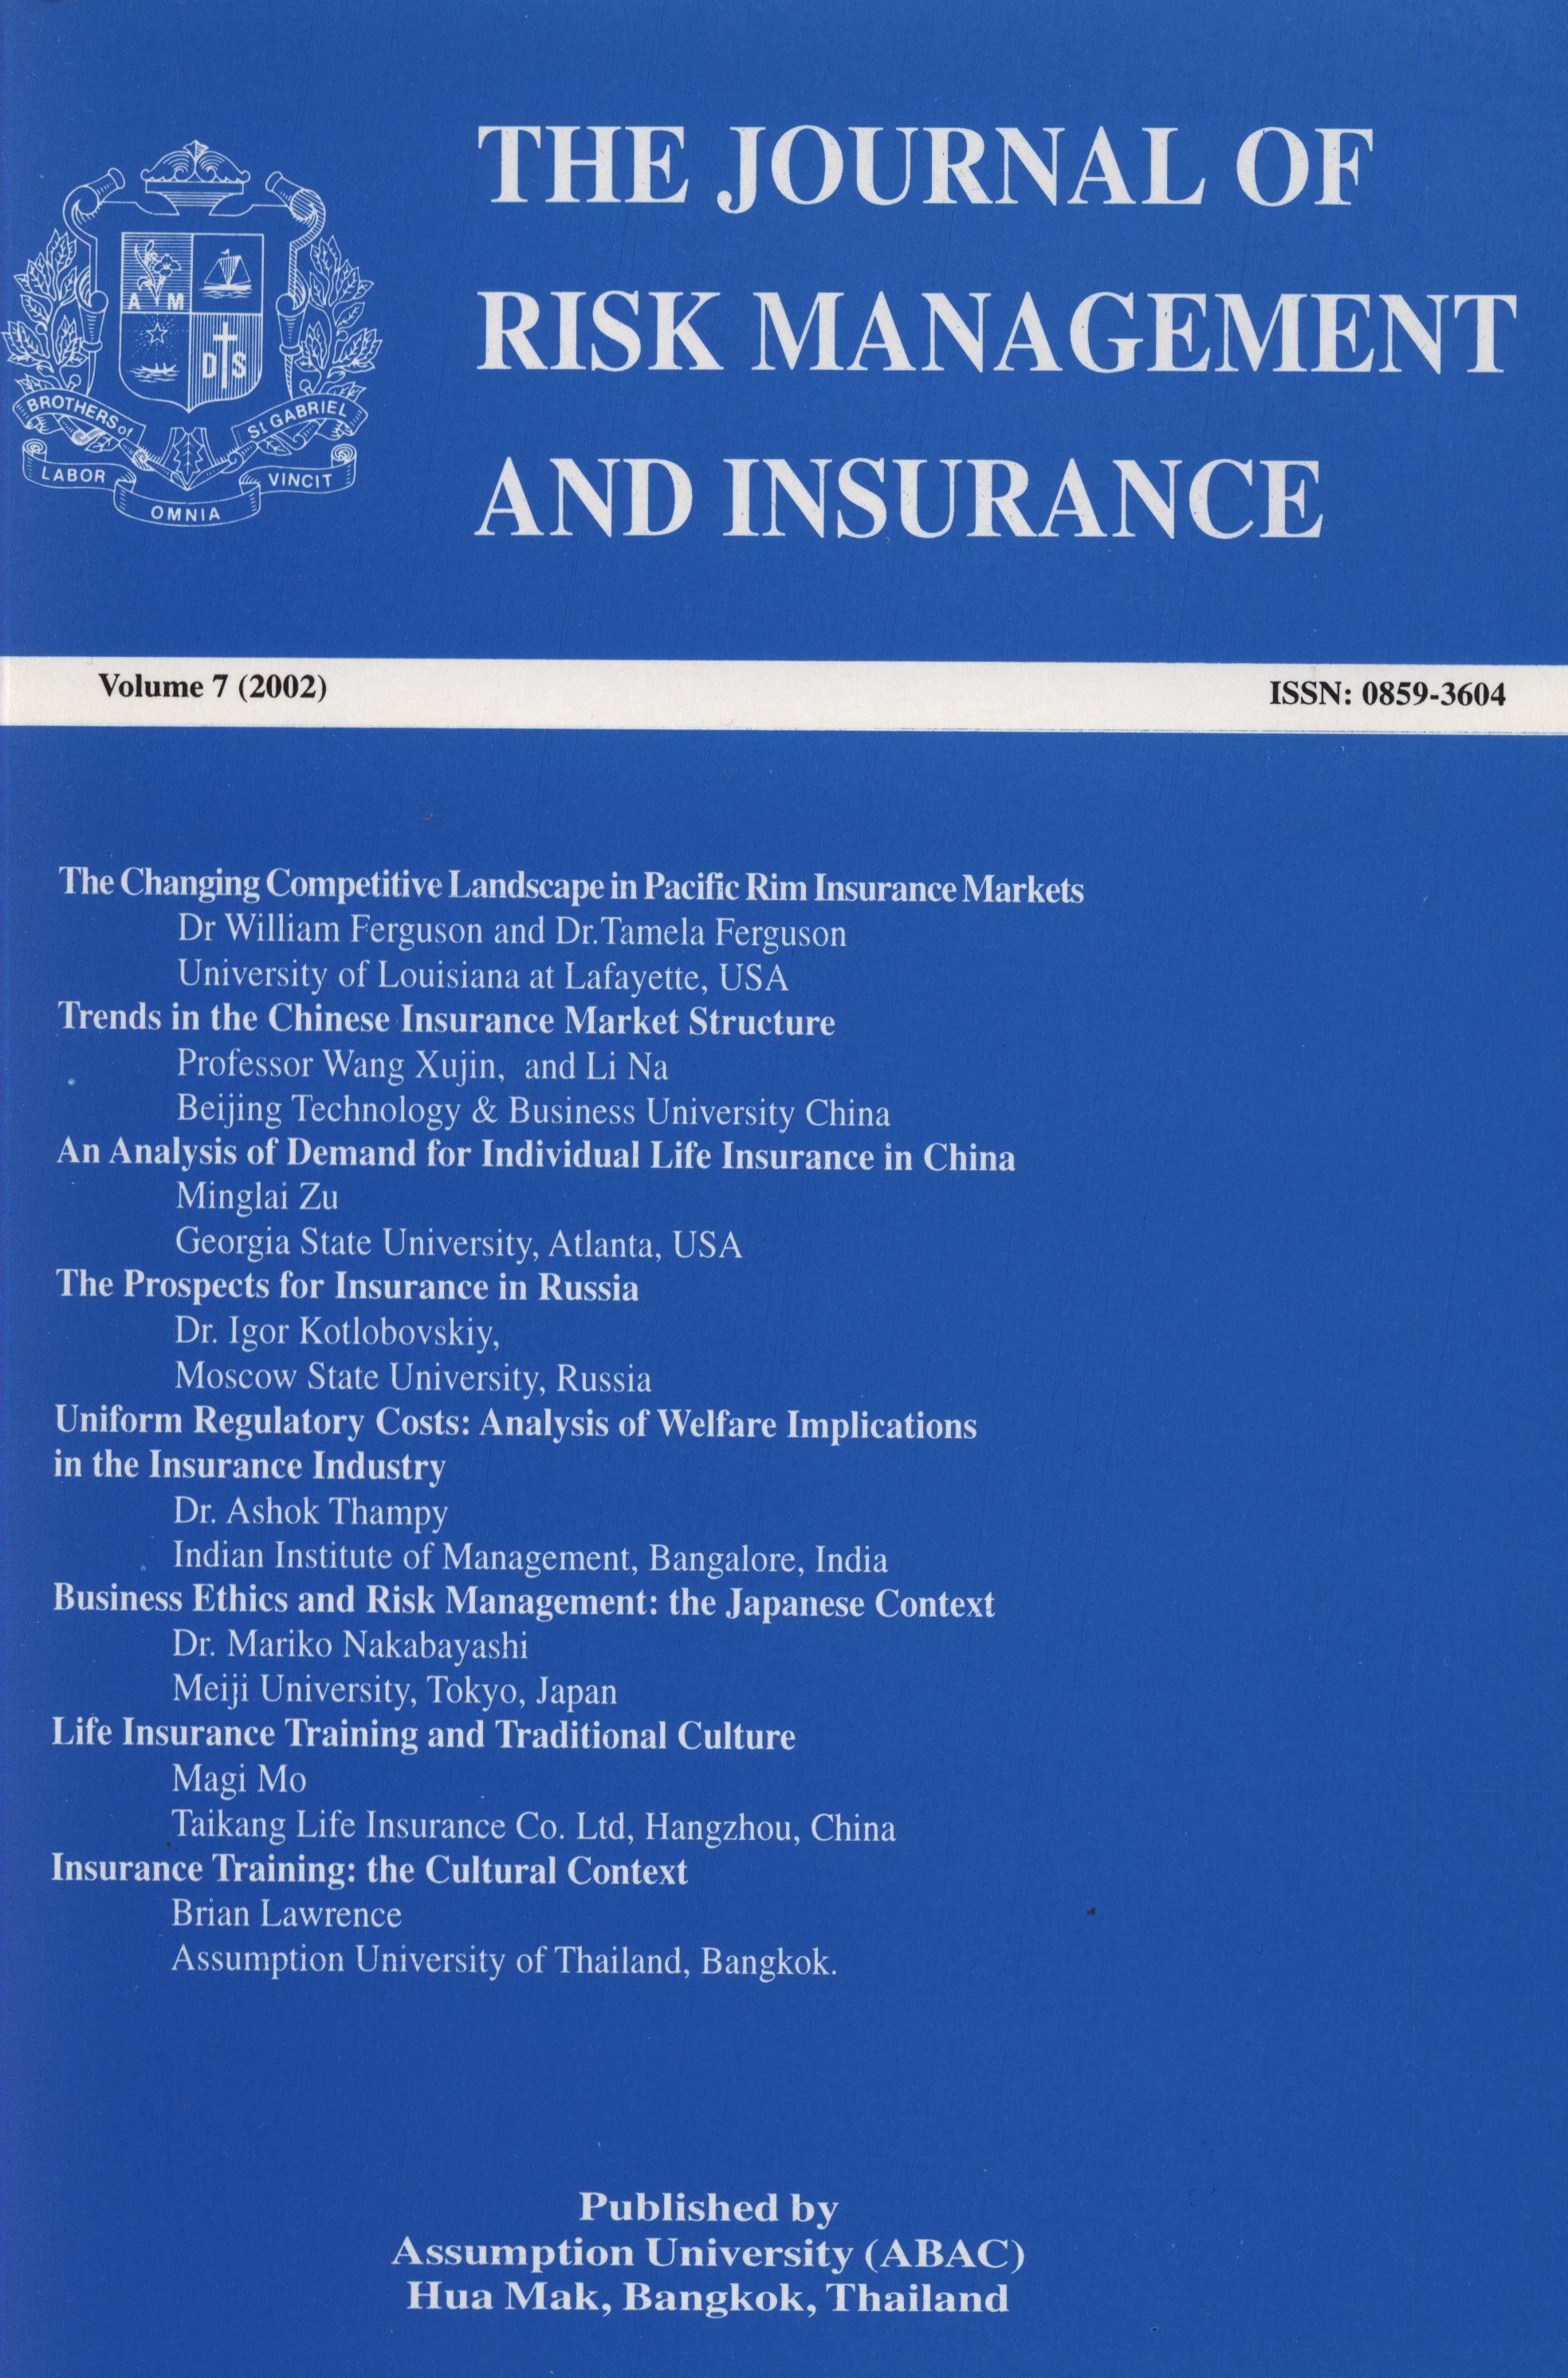 					View Vol. 7 No. 1 (2002): The Journal of Risk Management and Insurance
				